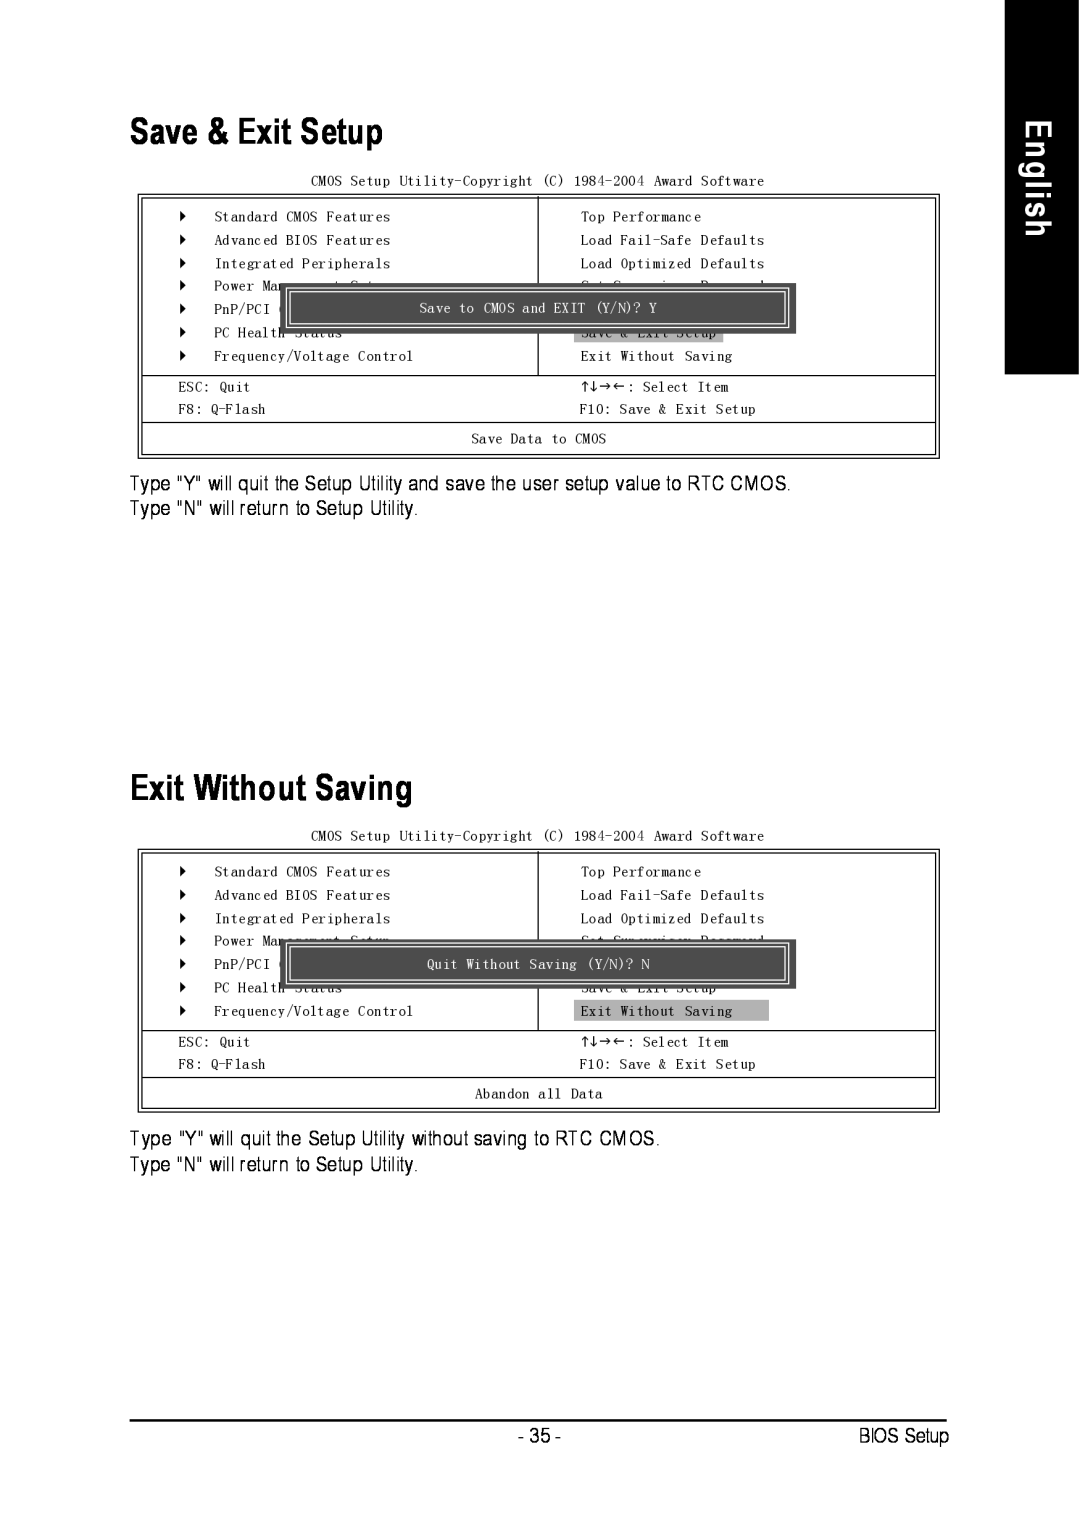 Intel 8S651M-RZ-C user manual Save & Exit Setup, Exit Without Saving, English, Save to CMOS and 